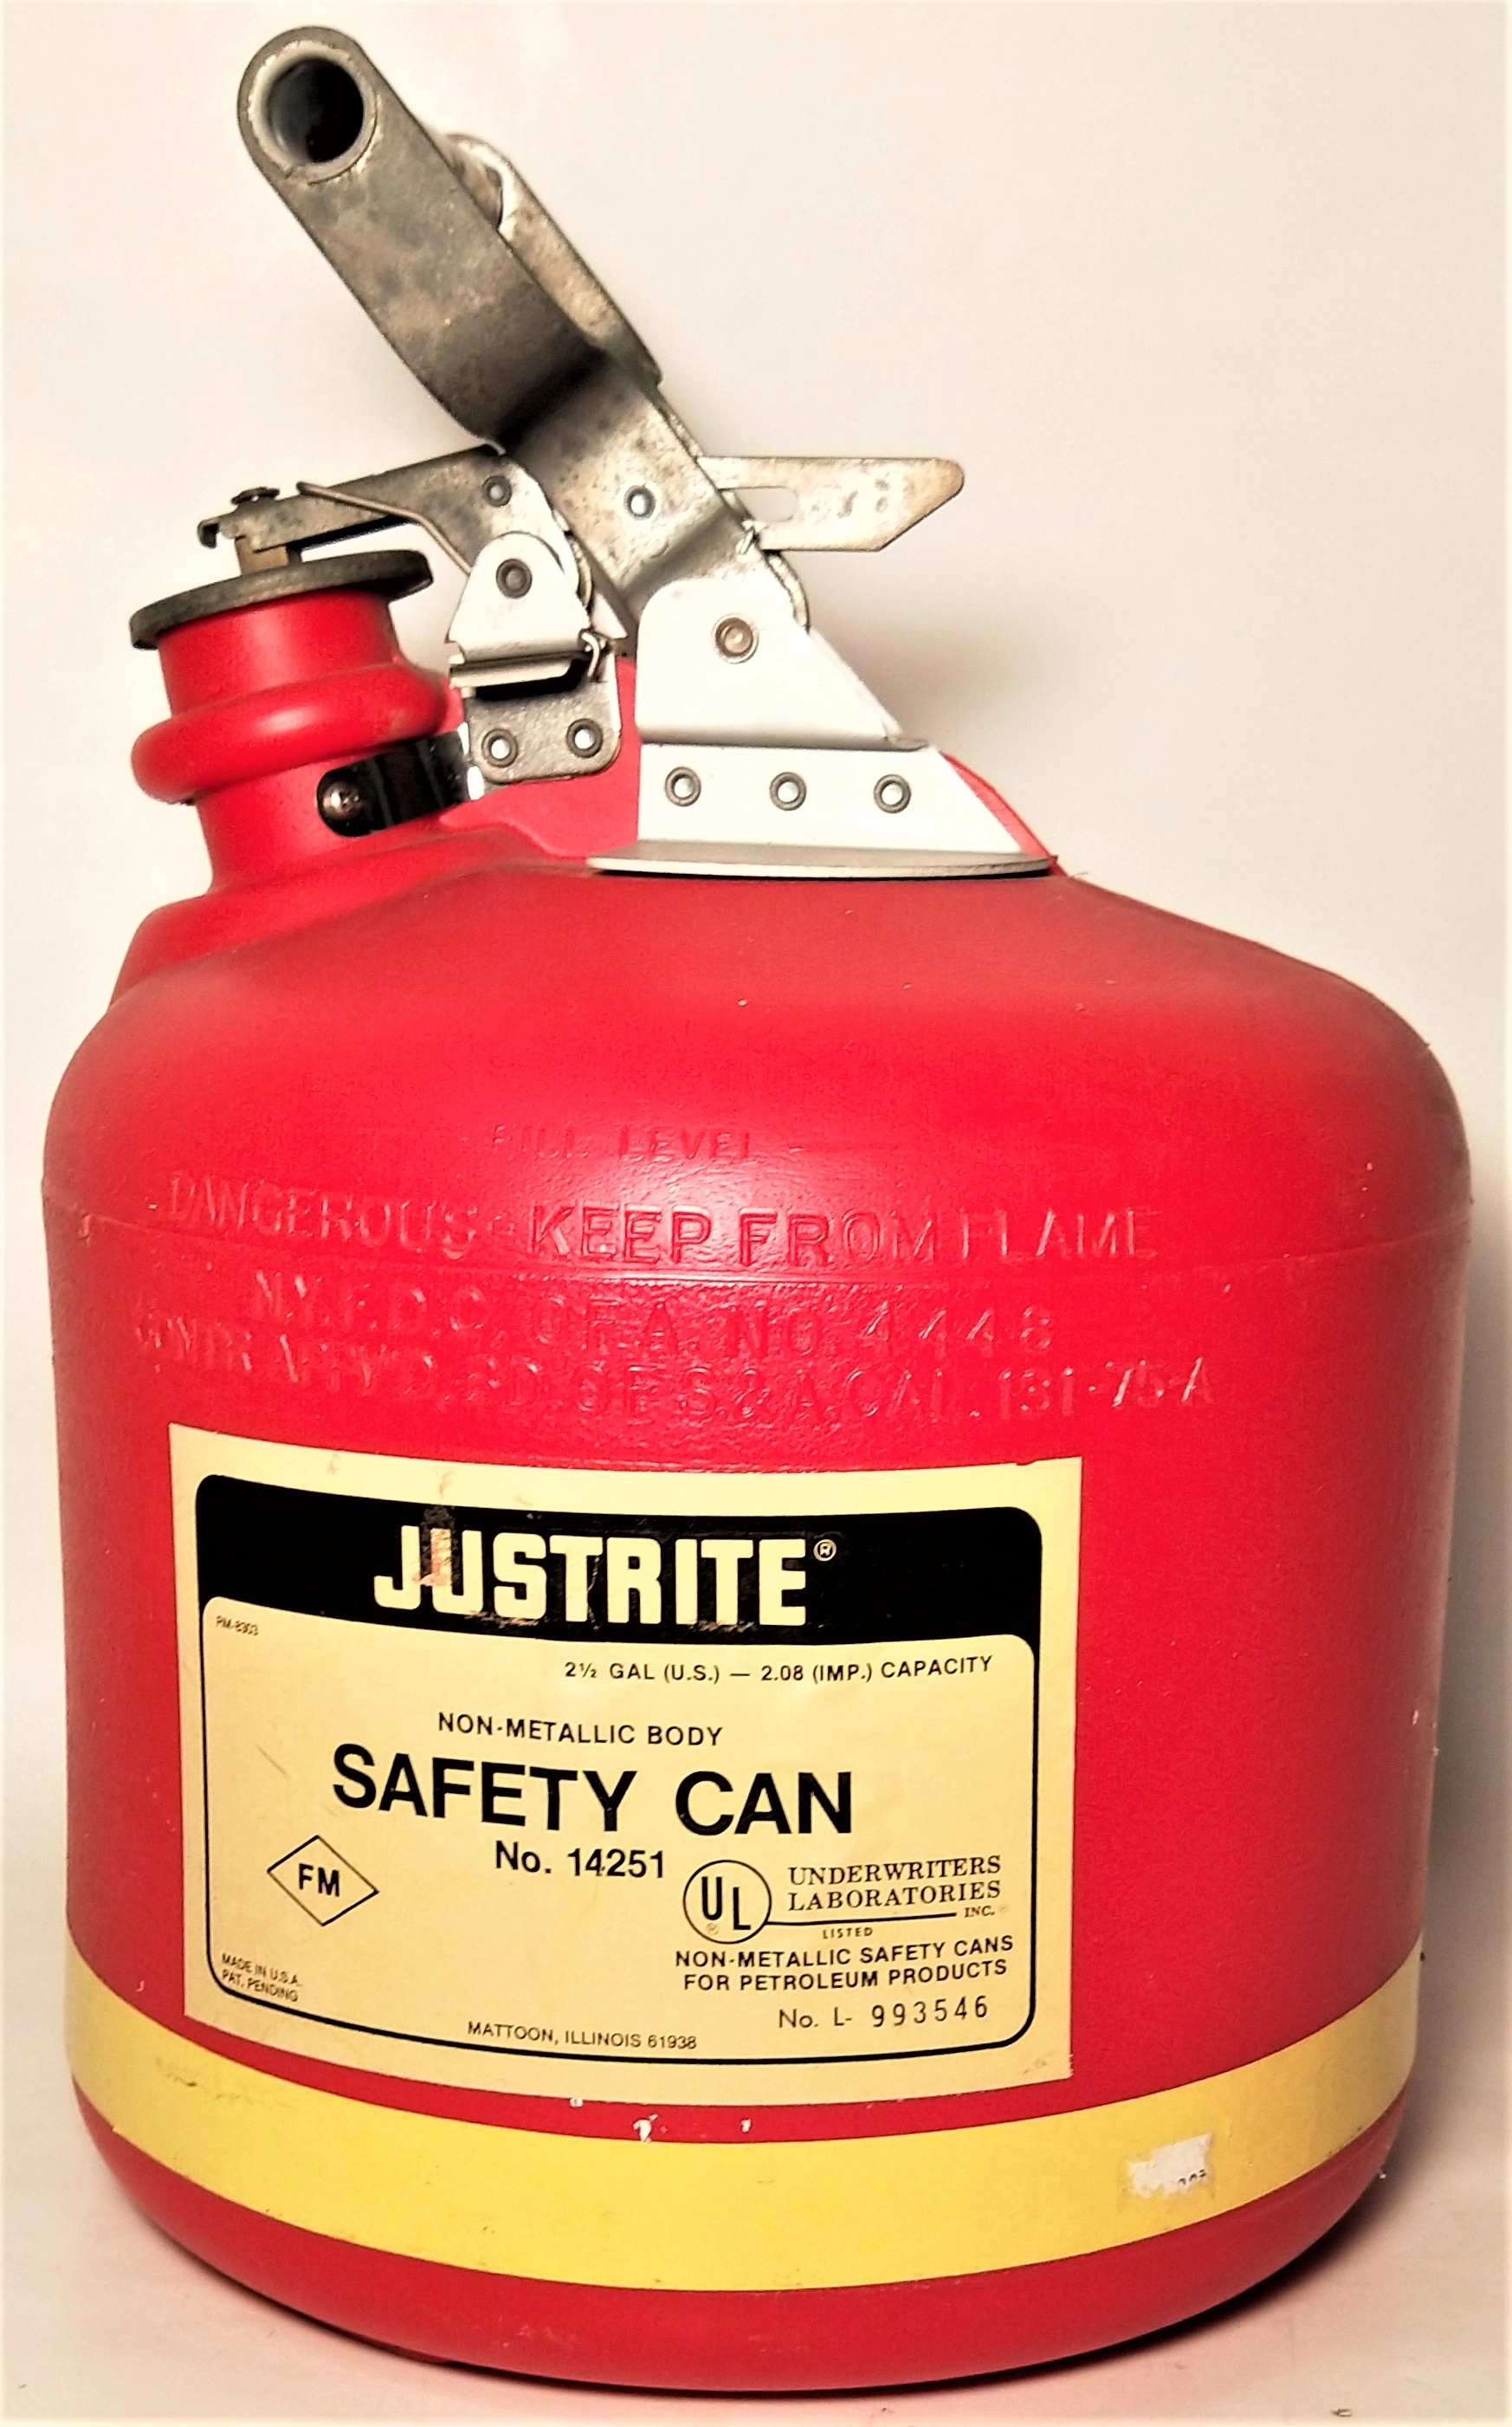 Justrite 14251 Non-Metallic Safety Can for Petroleum Products - 9.4 L (2.5 Gallon)